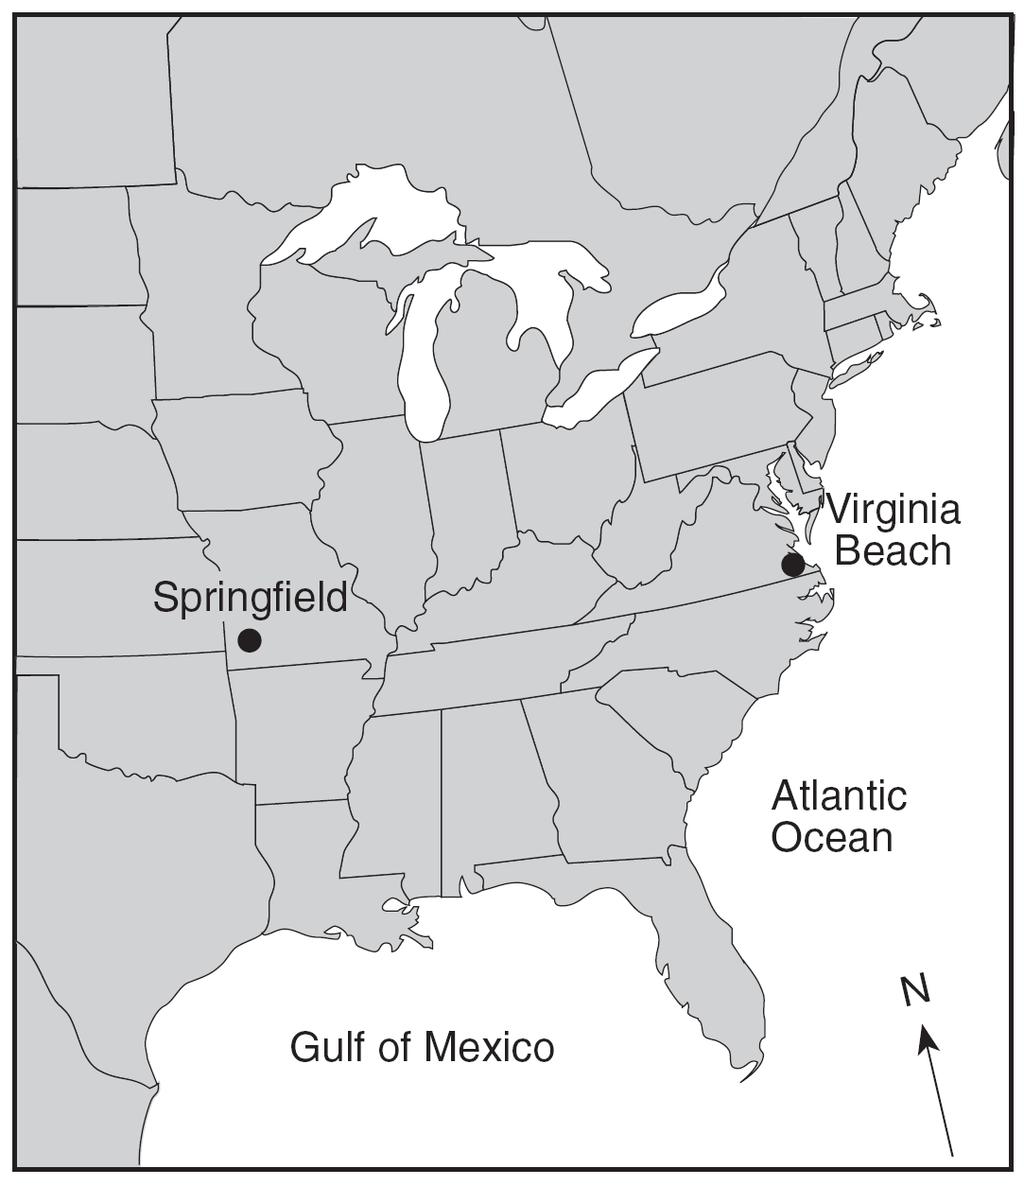 149. The map below shows the locations of Virginia Beach, Virginia, and Springfield, Missouri.